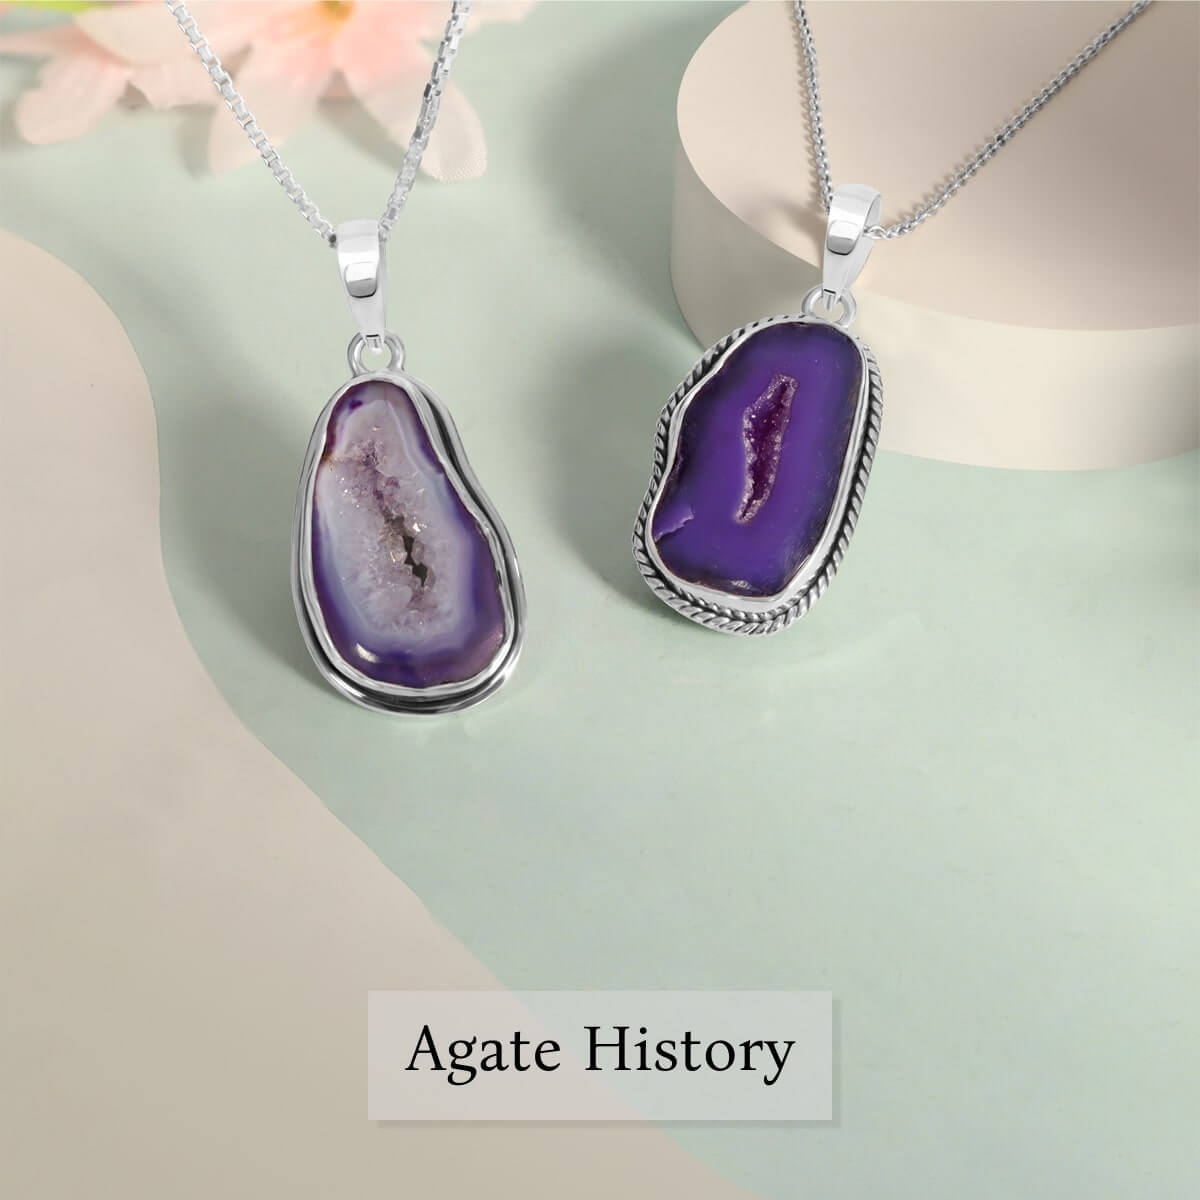 Agate History